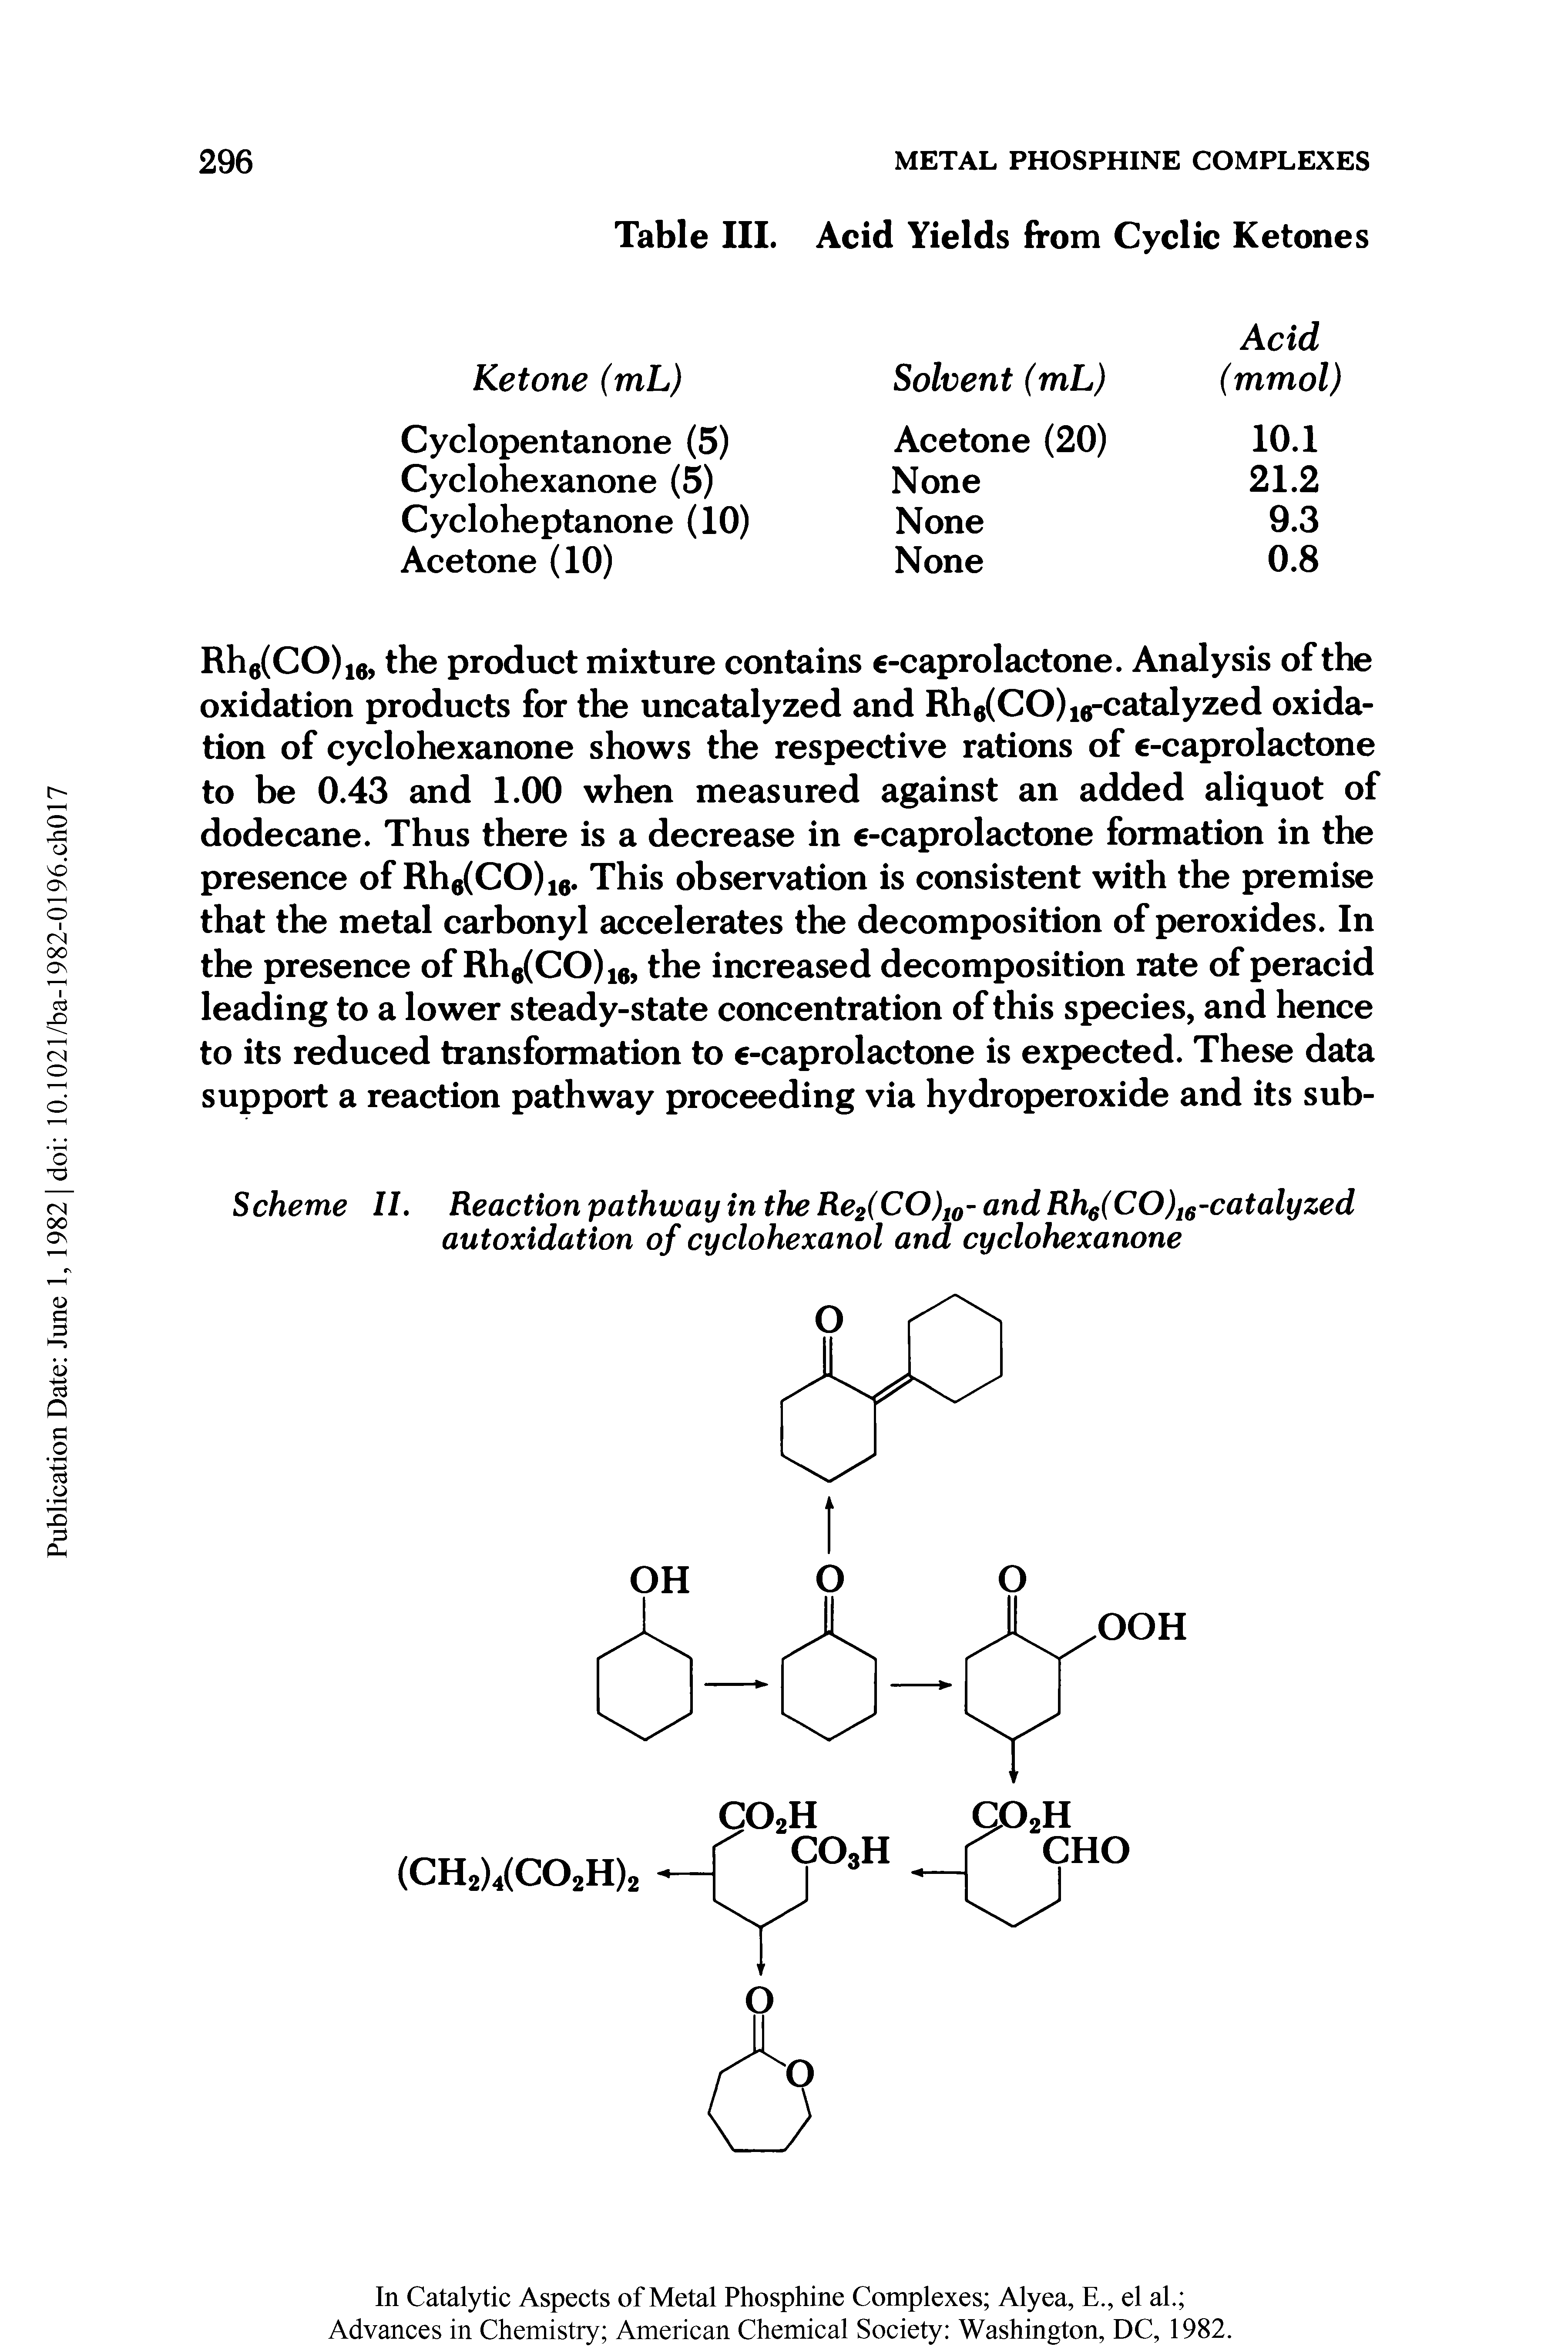 Scheme II. Reaction pathway in the Re2(CO)10- and Rh6(CO)16-catalyzed autoxidation of cyclohexanol and cyclohexanone...